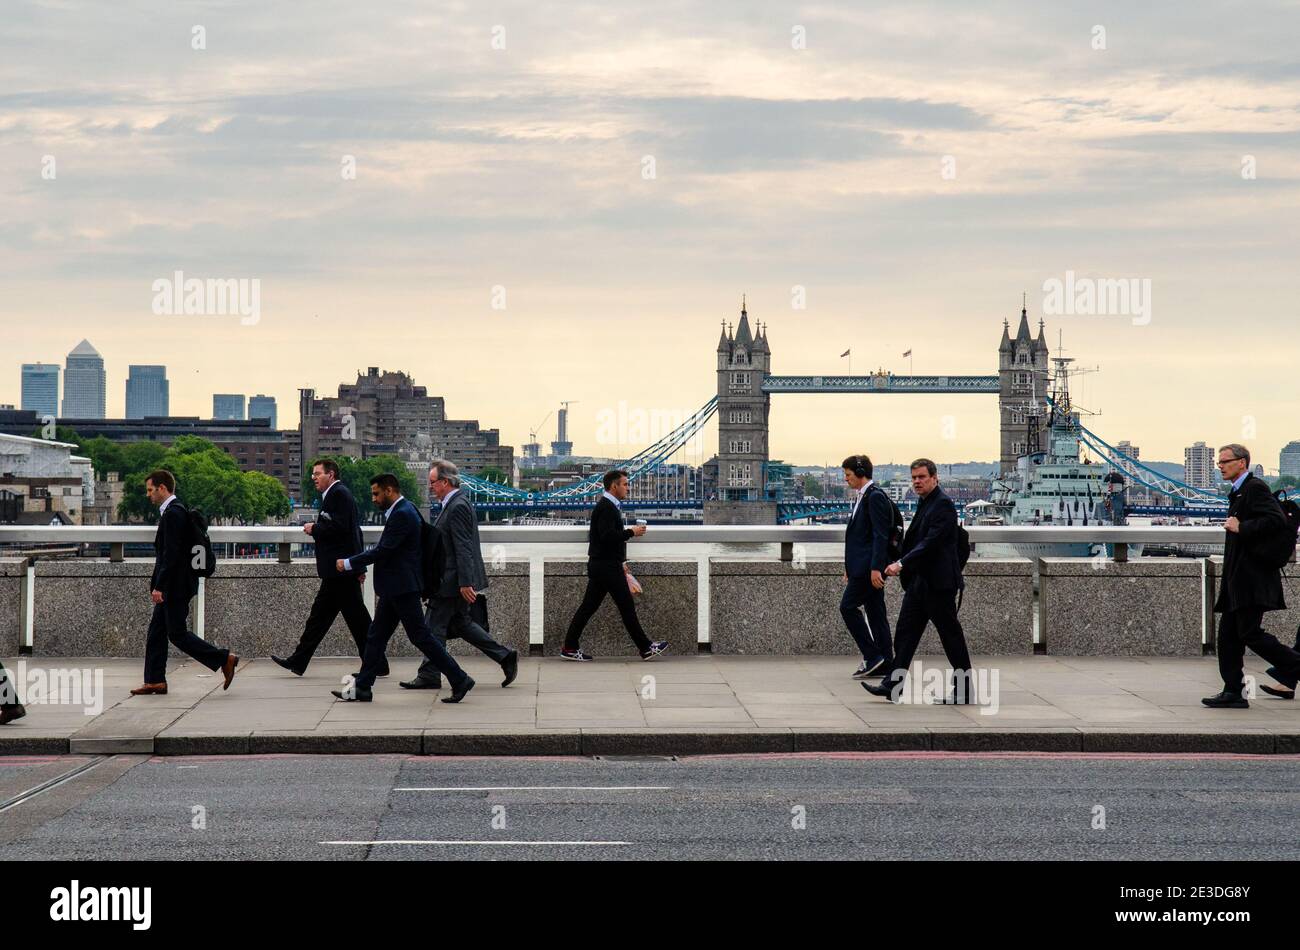 London, England - June 24, 2015: Commuters walking across London Bridge to offices in the 'square mile' City of London business district. Stock Photo